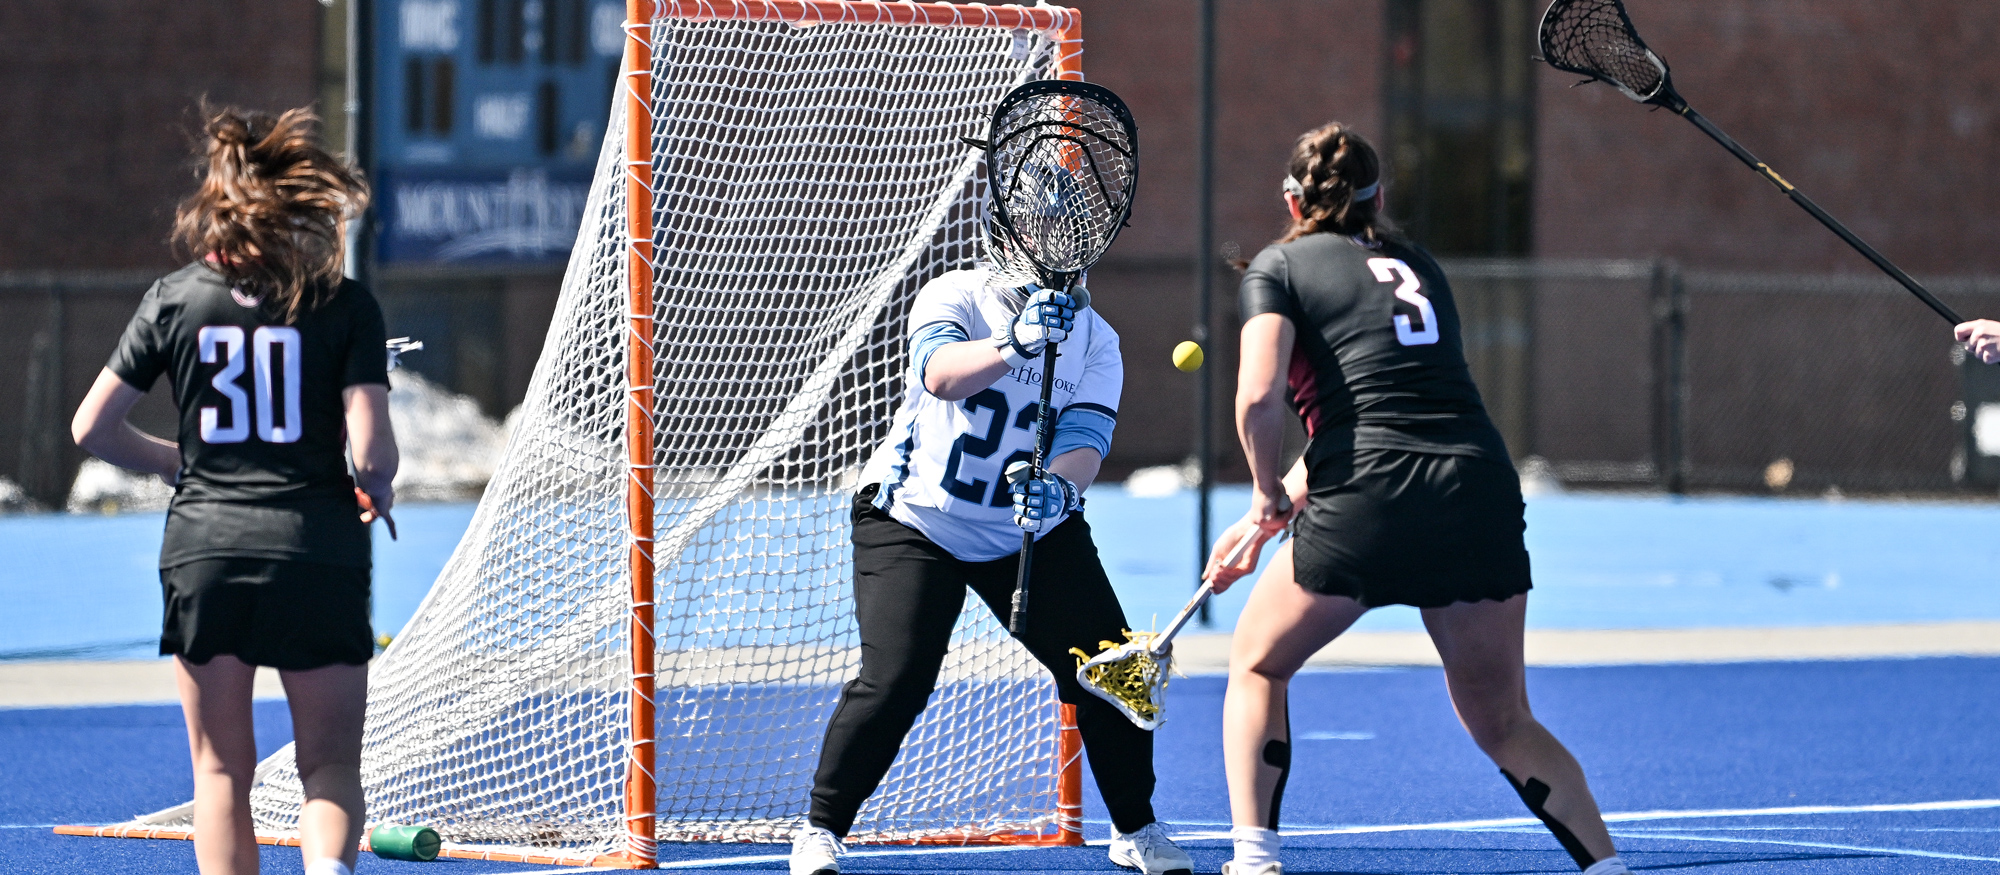 Emma Tower made 16 saves in Mount Holyoke's 10-6 loss to Wellesley on April 22, 2023. (RJB Sports file photo)